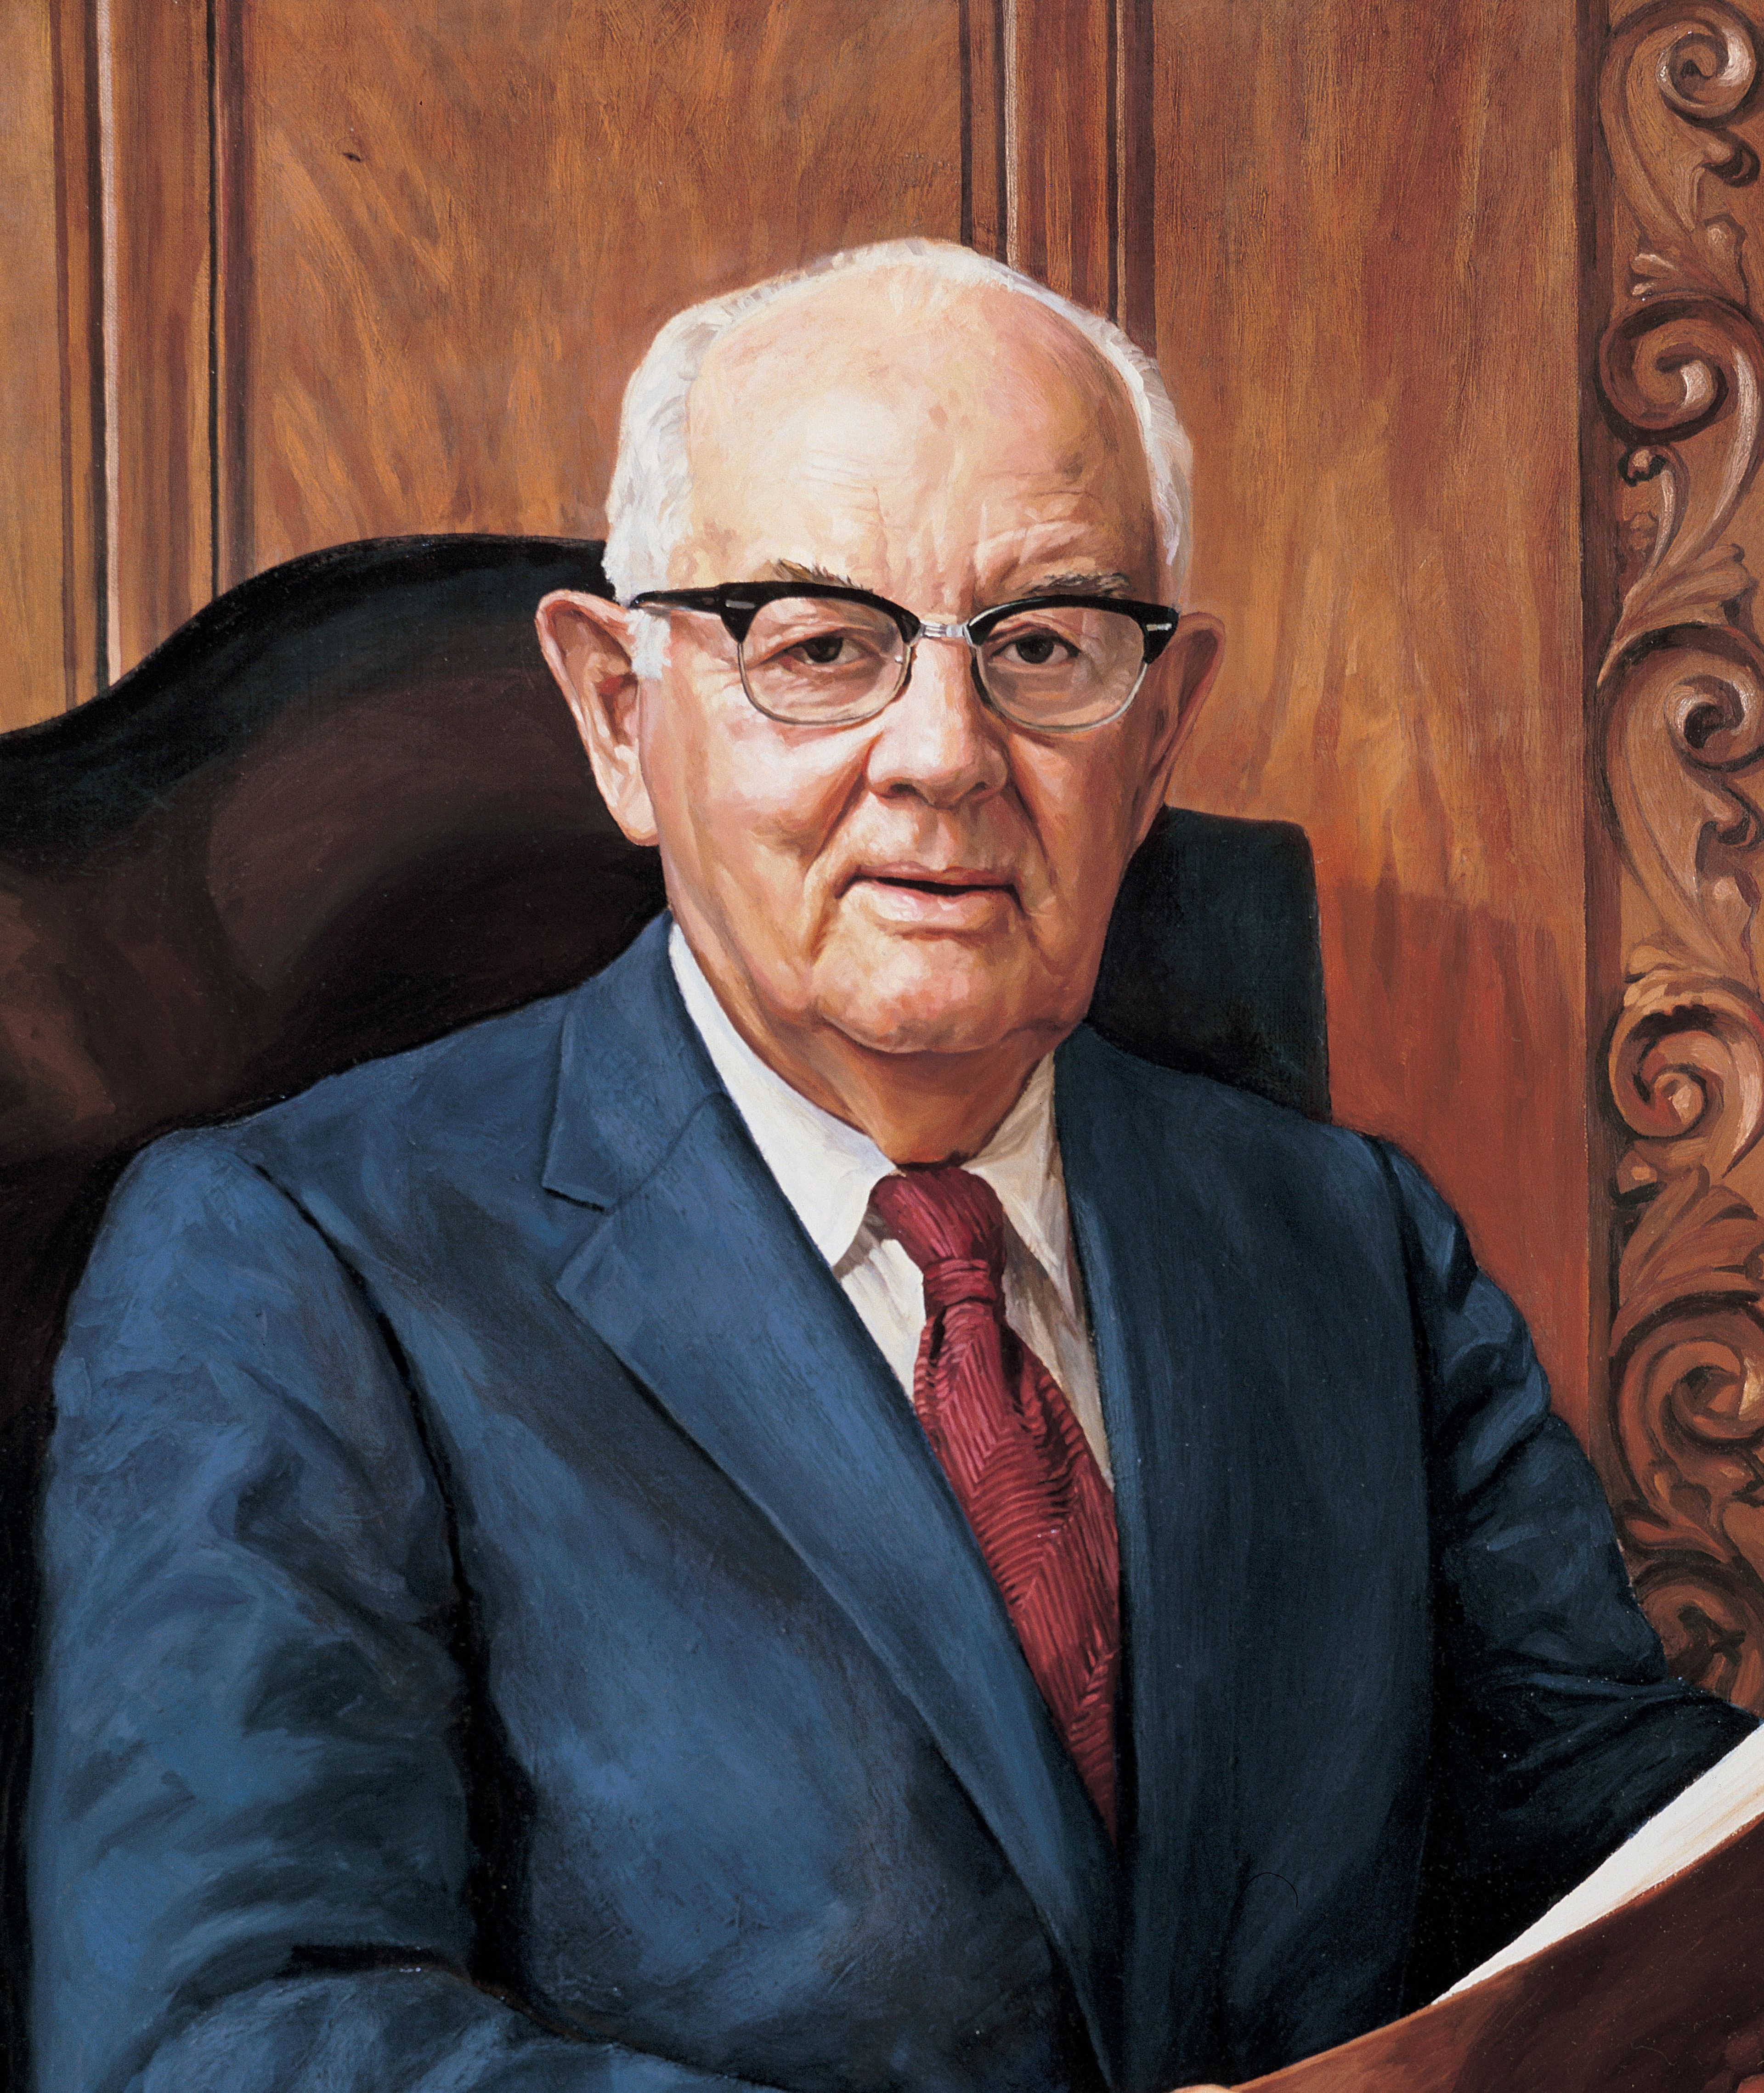 Spencer W. Kimball, by Judith A. Mehr. President Kimball served as the 12th President of the Church from 1973 to 1985.